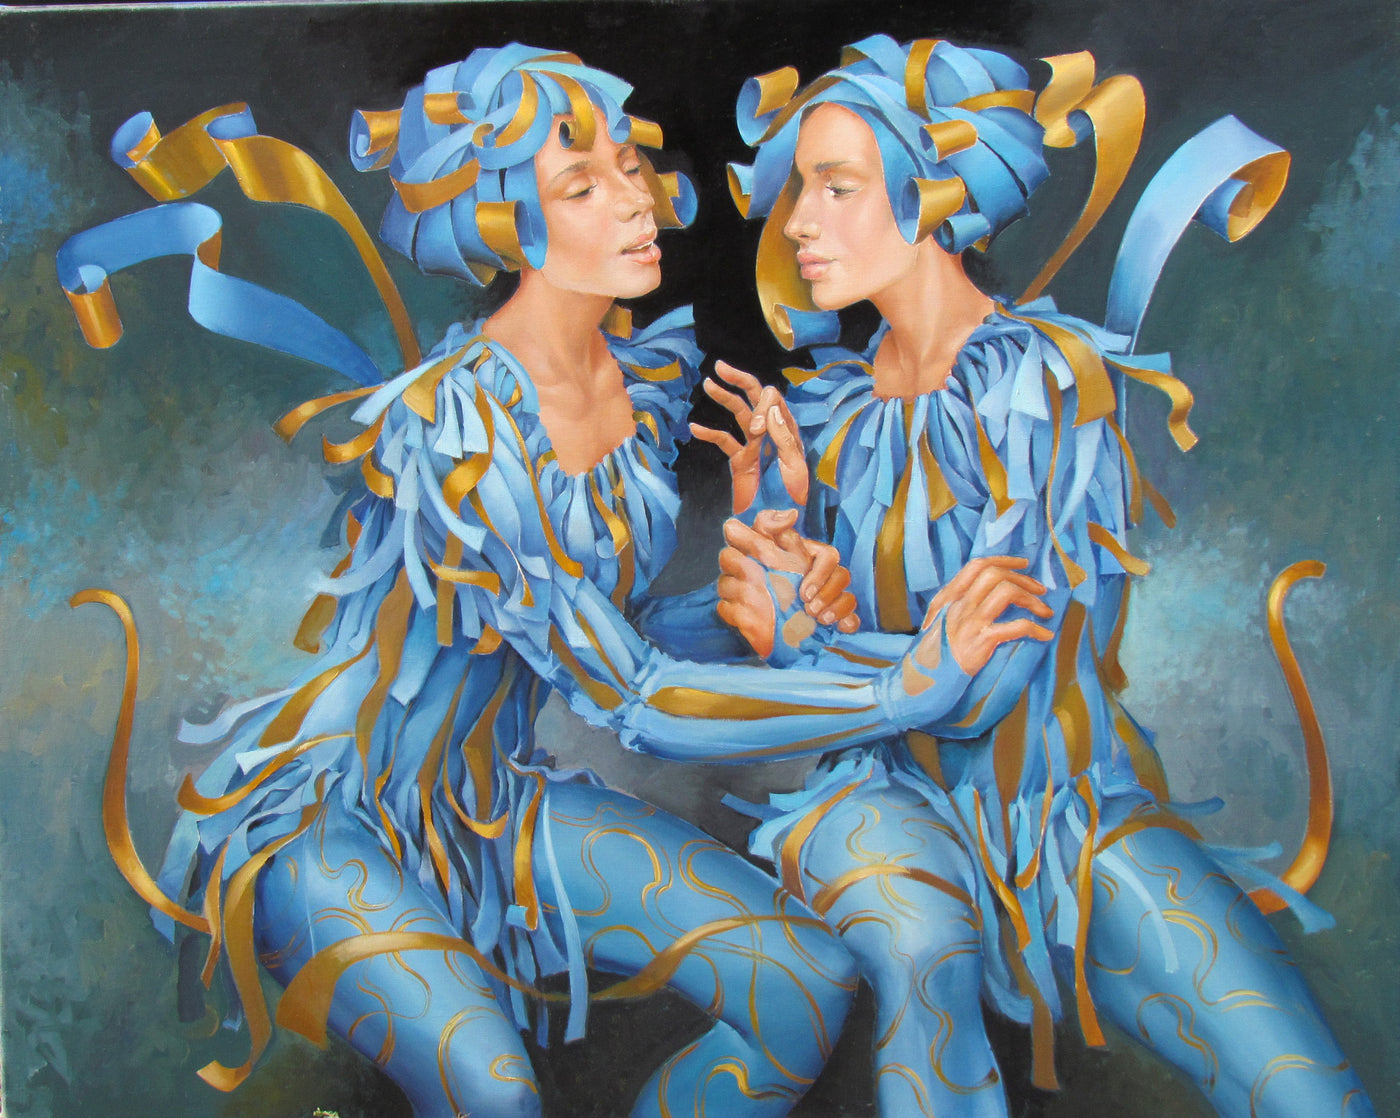 Me And You In Blue by Andrius Kovelinas - Green Gallery